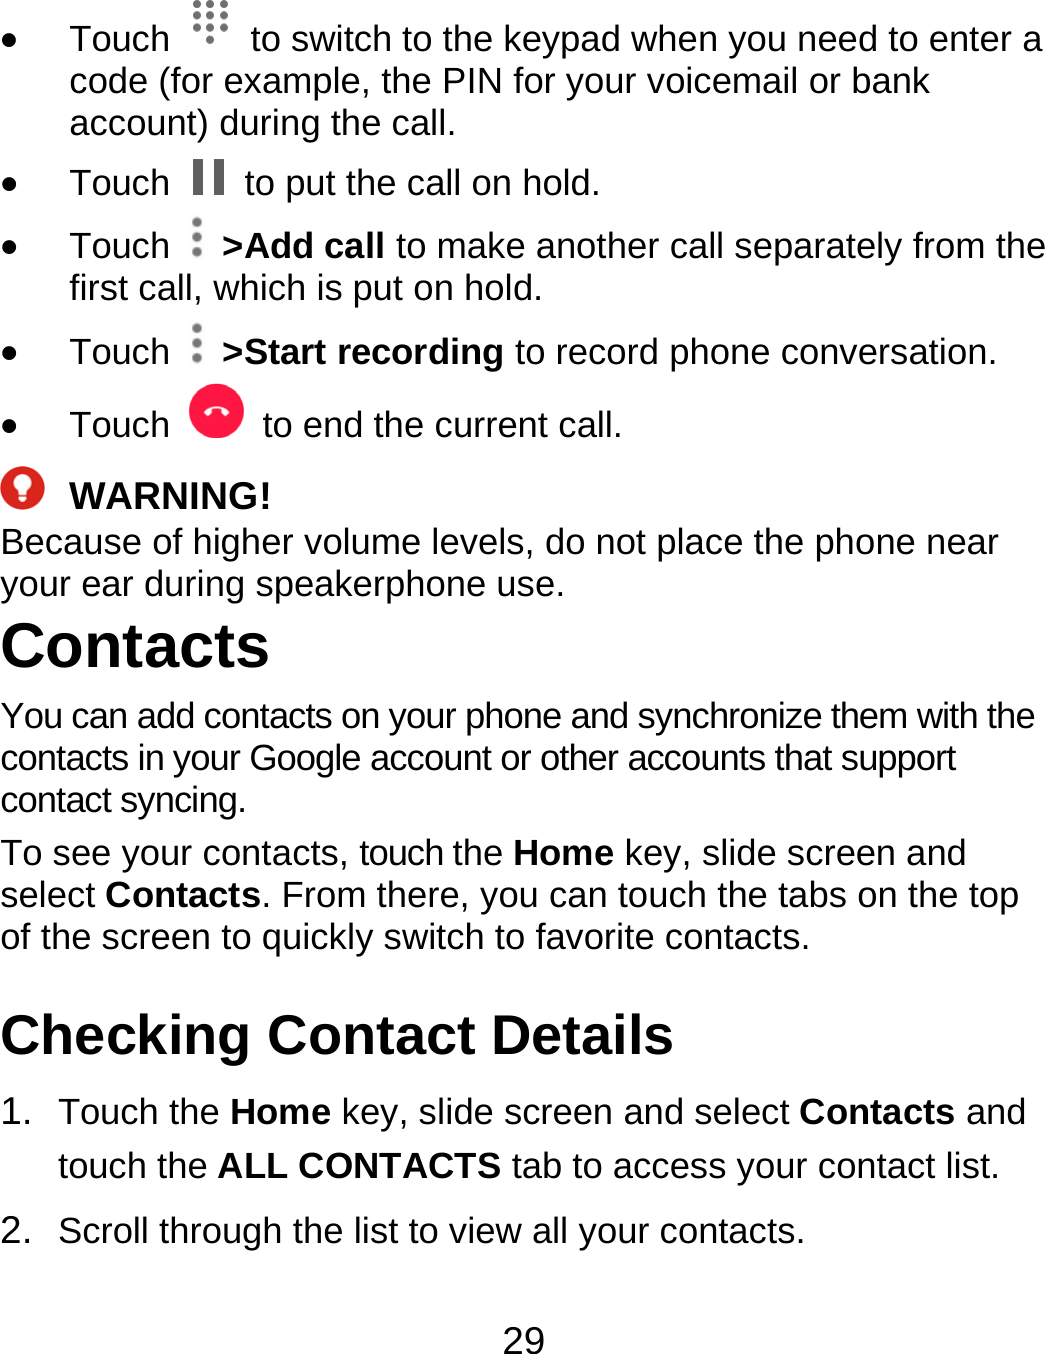 29  Touch    to switch to the keypad when you need to enter a code (for example, the PIN for your voicemail or bank account) during the call.  Touch    to put the call on hold.  Touch   &gt;Add call to make another call separately from the first call, which is put on hold.  Touch   &gt;Start recording to record phone conversation.  Touch    to end the current call.  WARNING! Because of higher volume levels, do not place the phone near your ear during speakerphone use. Contacts You can add contacts on your phone and synchronize them with the contacts in your Google account or other accounts that support contact syncing. To see your contacts, touch the Home key, slide screen and select Contacts. From there, you can touch the tabs on the top of the screen to quickly switch to favorite contacts. Checking Contact Details 1.  Touch the Home key, slide screen and select Contacts and touch the ALL CONTACTS tab to access your contact list. 2.  Scroll through the list to view all your contacts. 